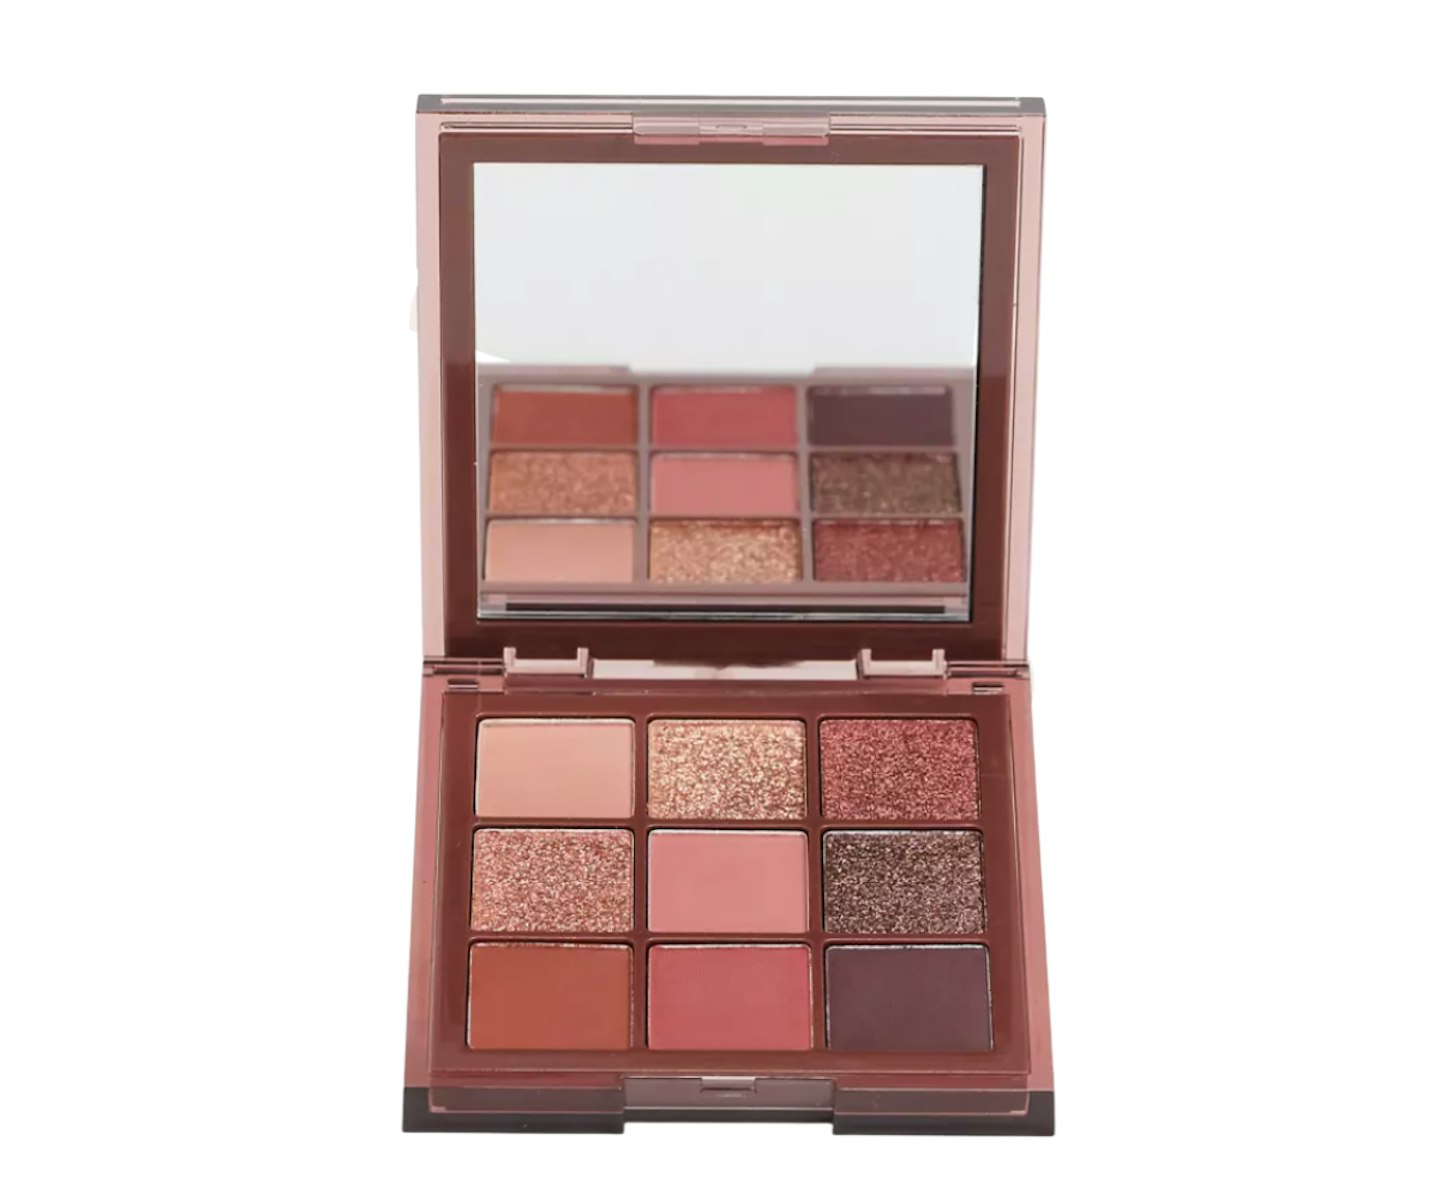 Huda Beauty NUDE Obsessions Eyeshadow Palette - Rich